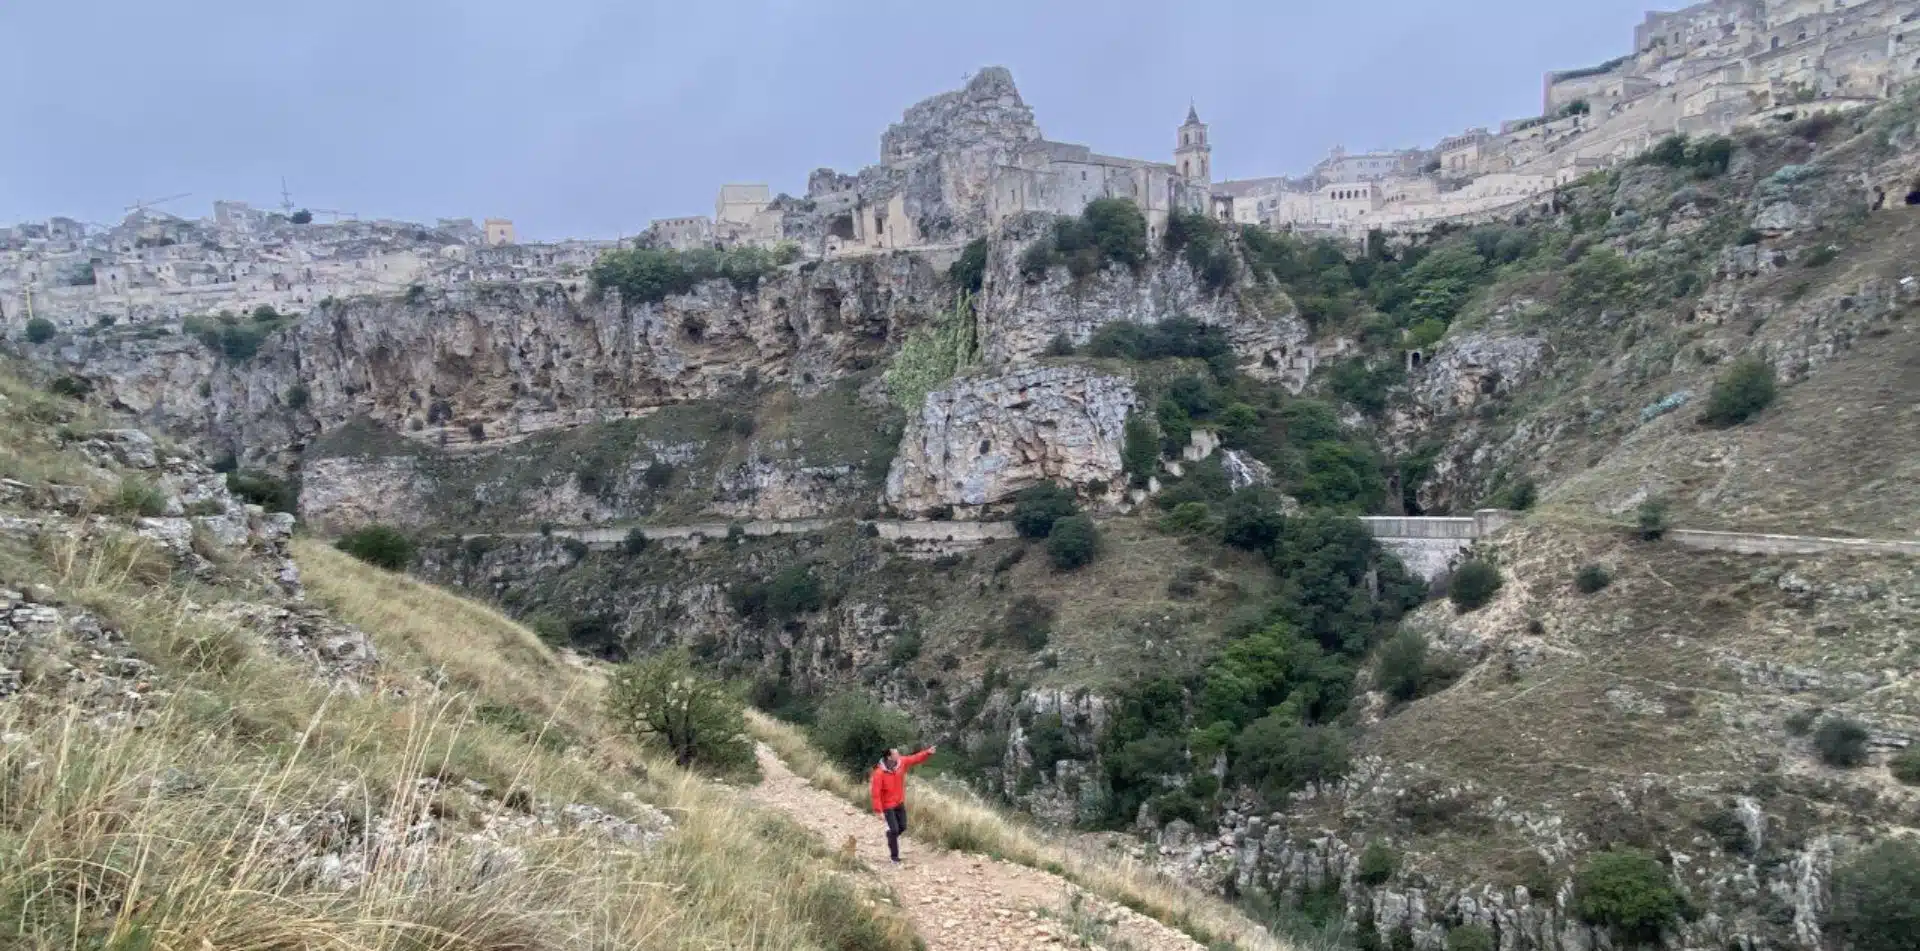 Stroll through the stunning scenery in Puglia, Italy